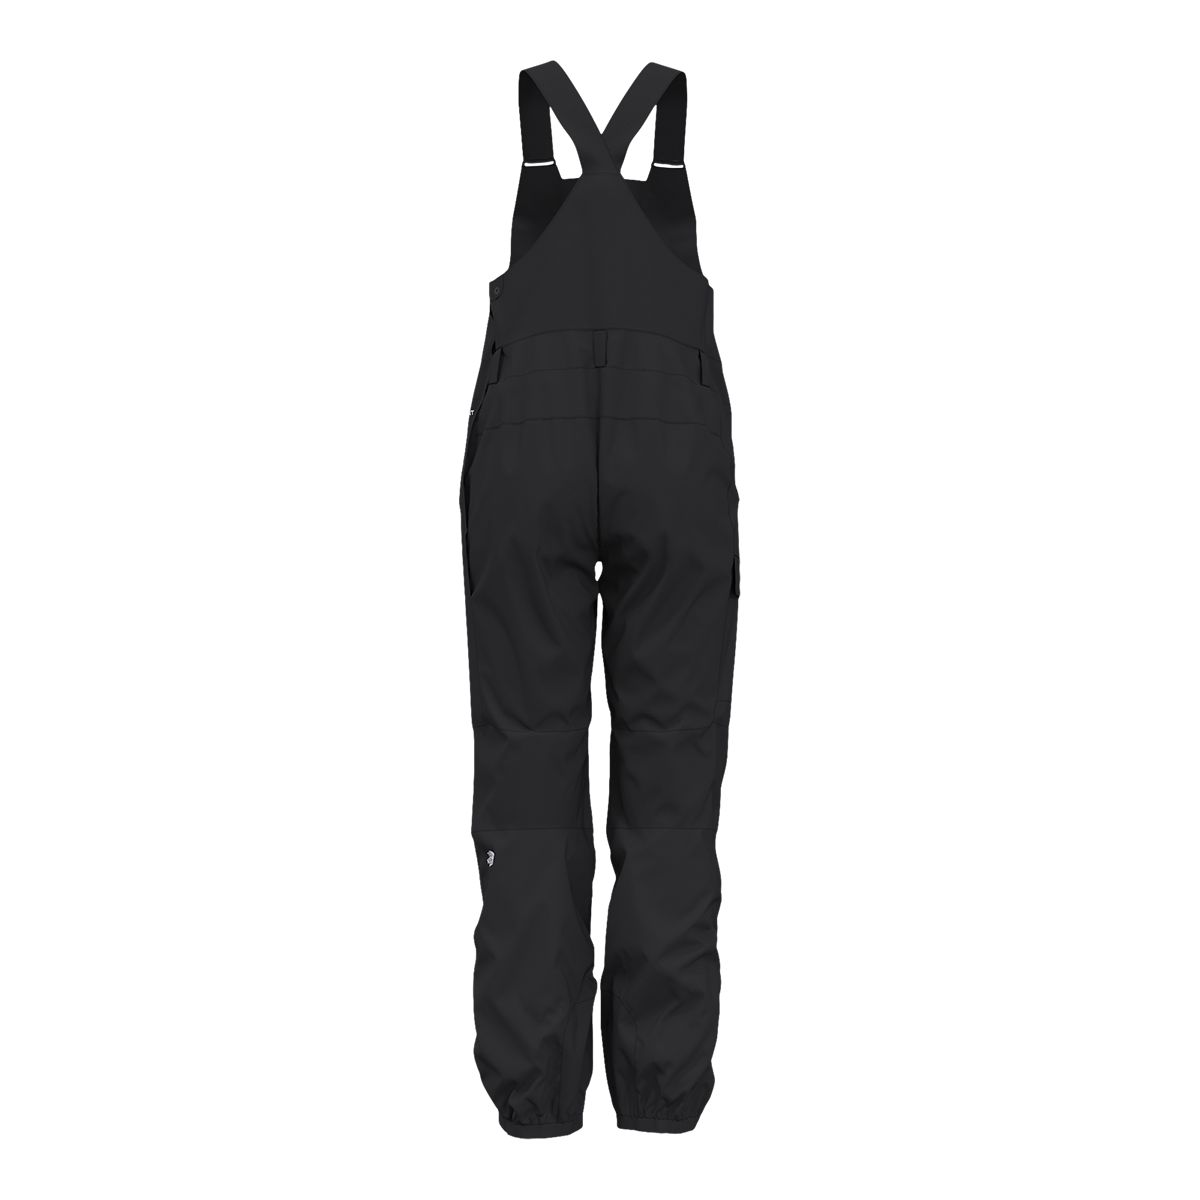 Columbia M's Bugaboo II Snow Pants  Outdoor stores, sports, cycling,  skiing, climbing